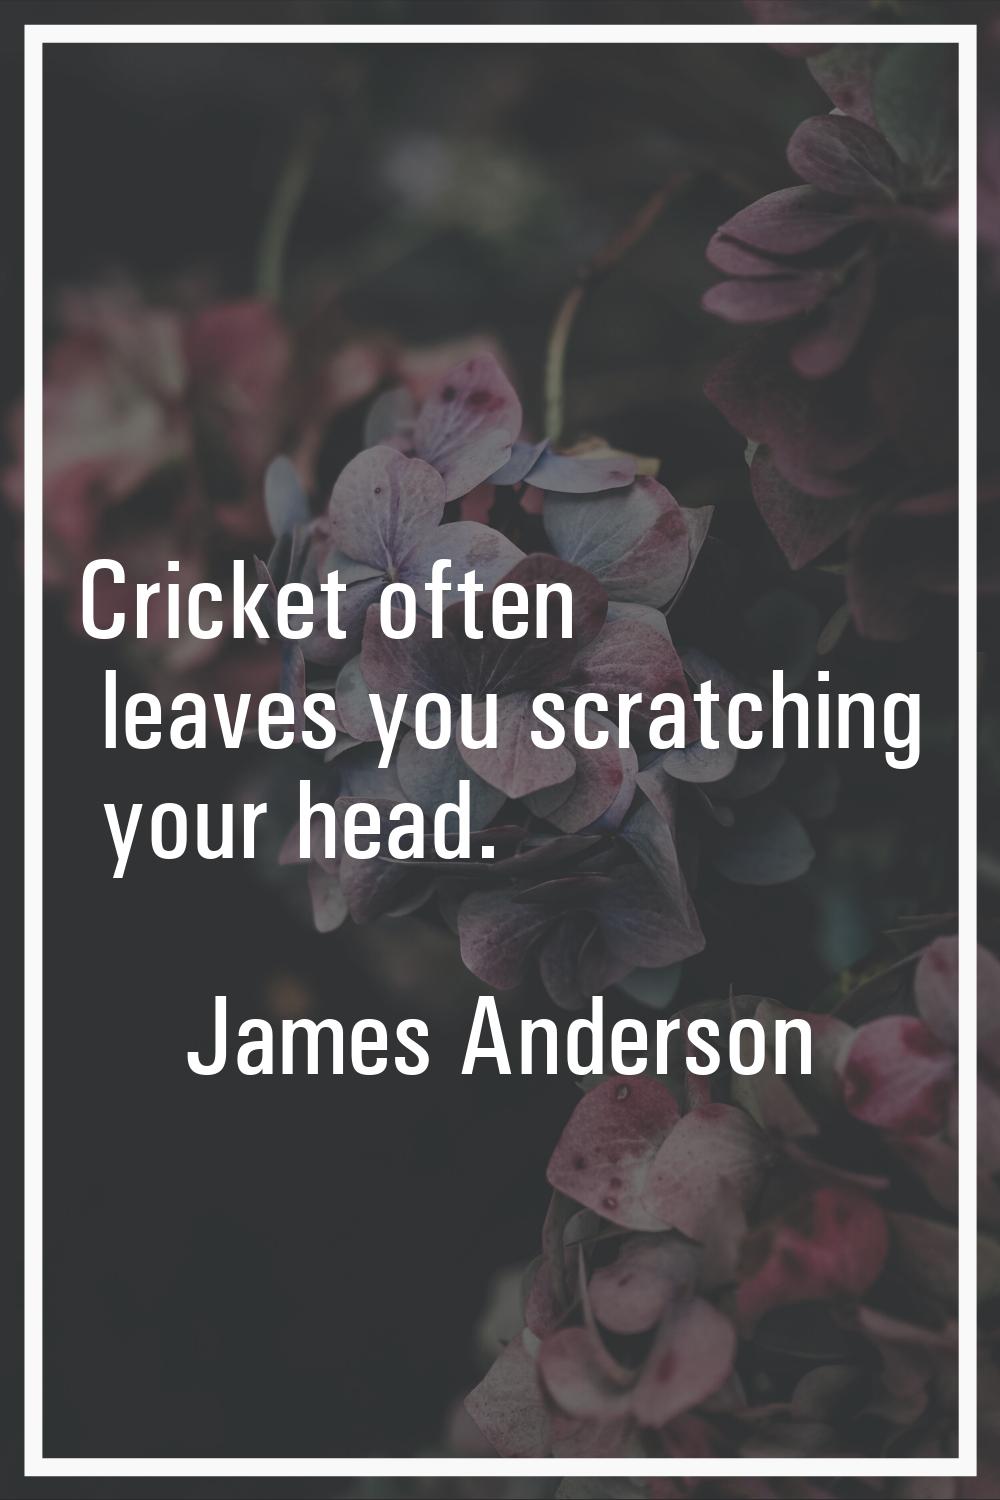 Cricket often leaves you scratching your head.